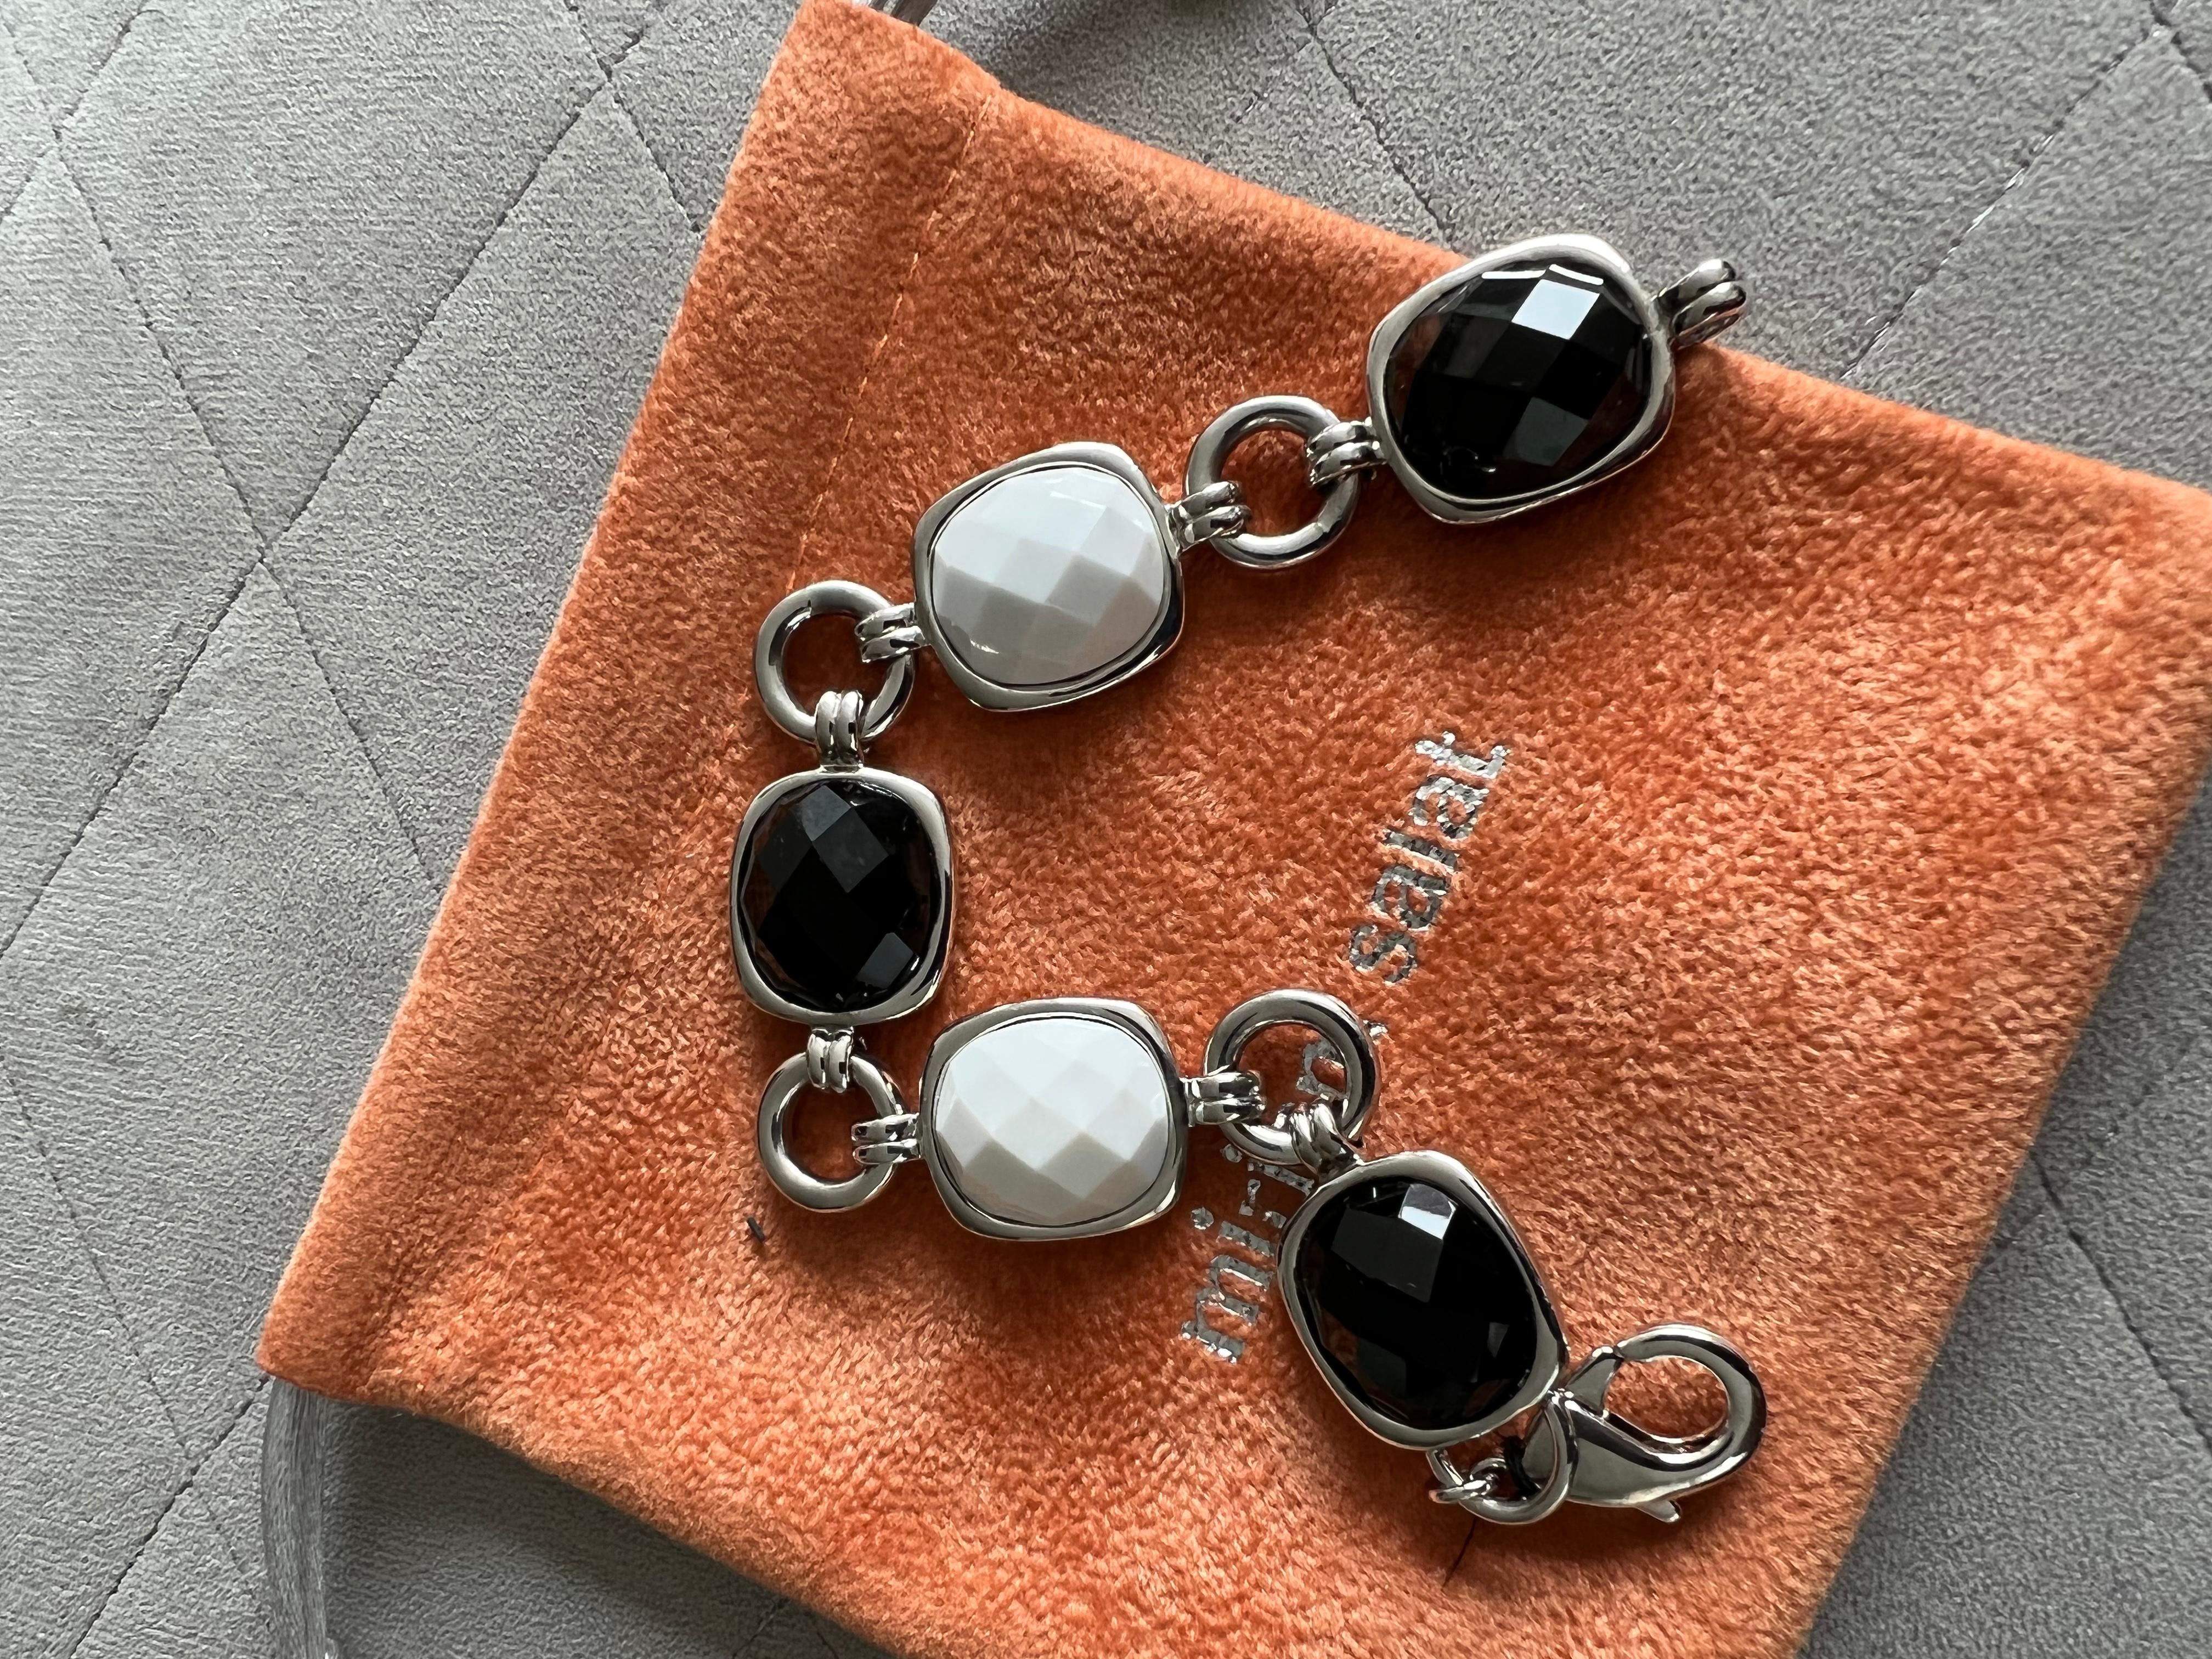 Miriam Salat Black and White resin link bracelet in resin and sterling silver. 
7.5 inch length 
Causal and dressy, day to night. This bracelet is a classic. 
Black and white Resin. 
Signed 925 Silver MRM
Comes with a Miriam Salat pouch. 
Perfect